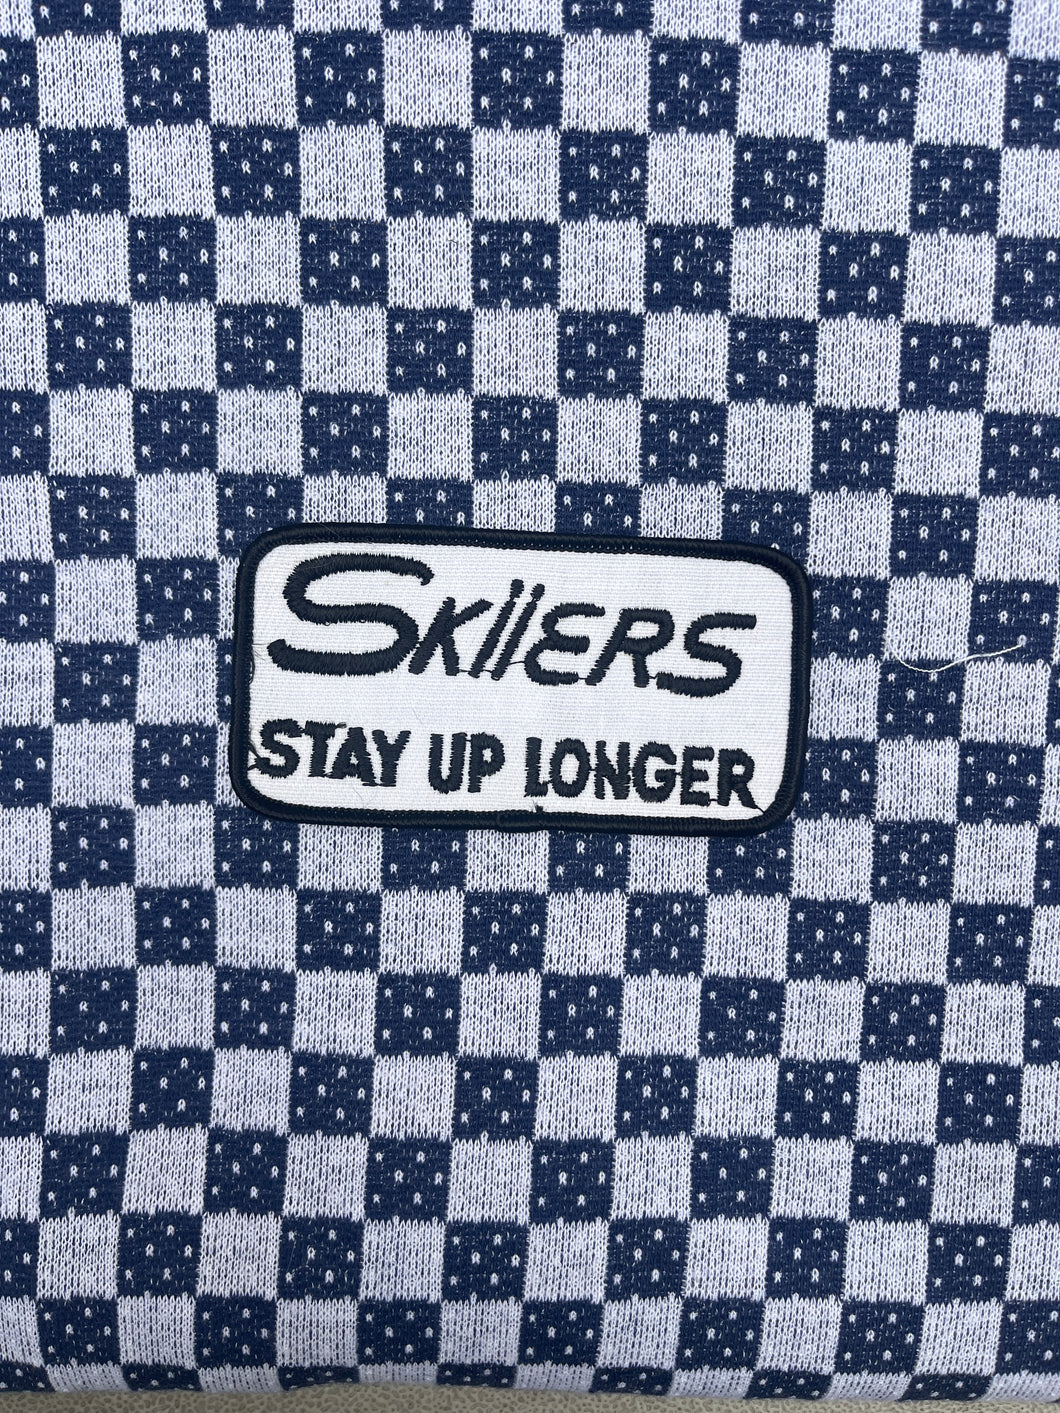 Skiiers Stay Up Longer Patch